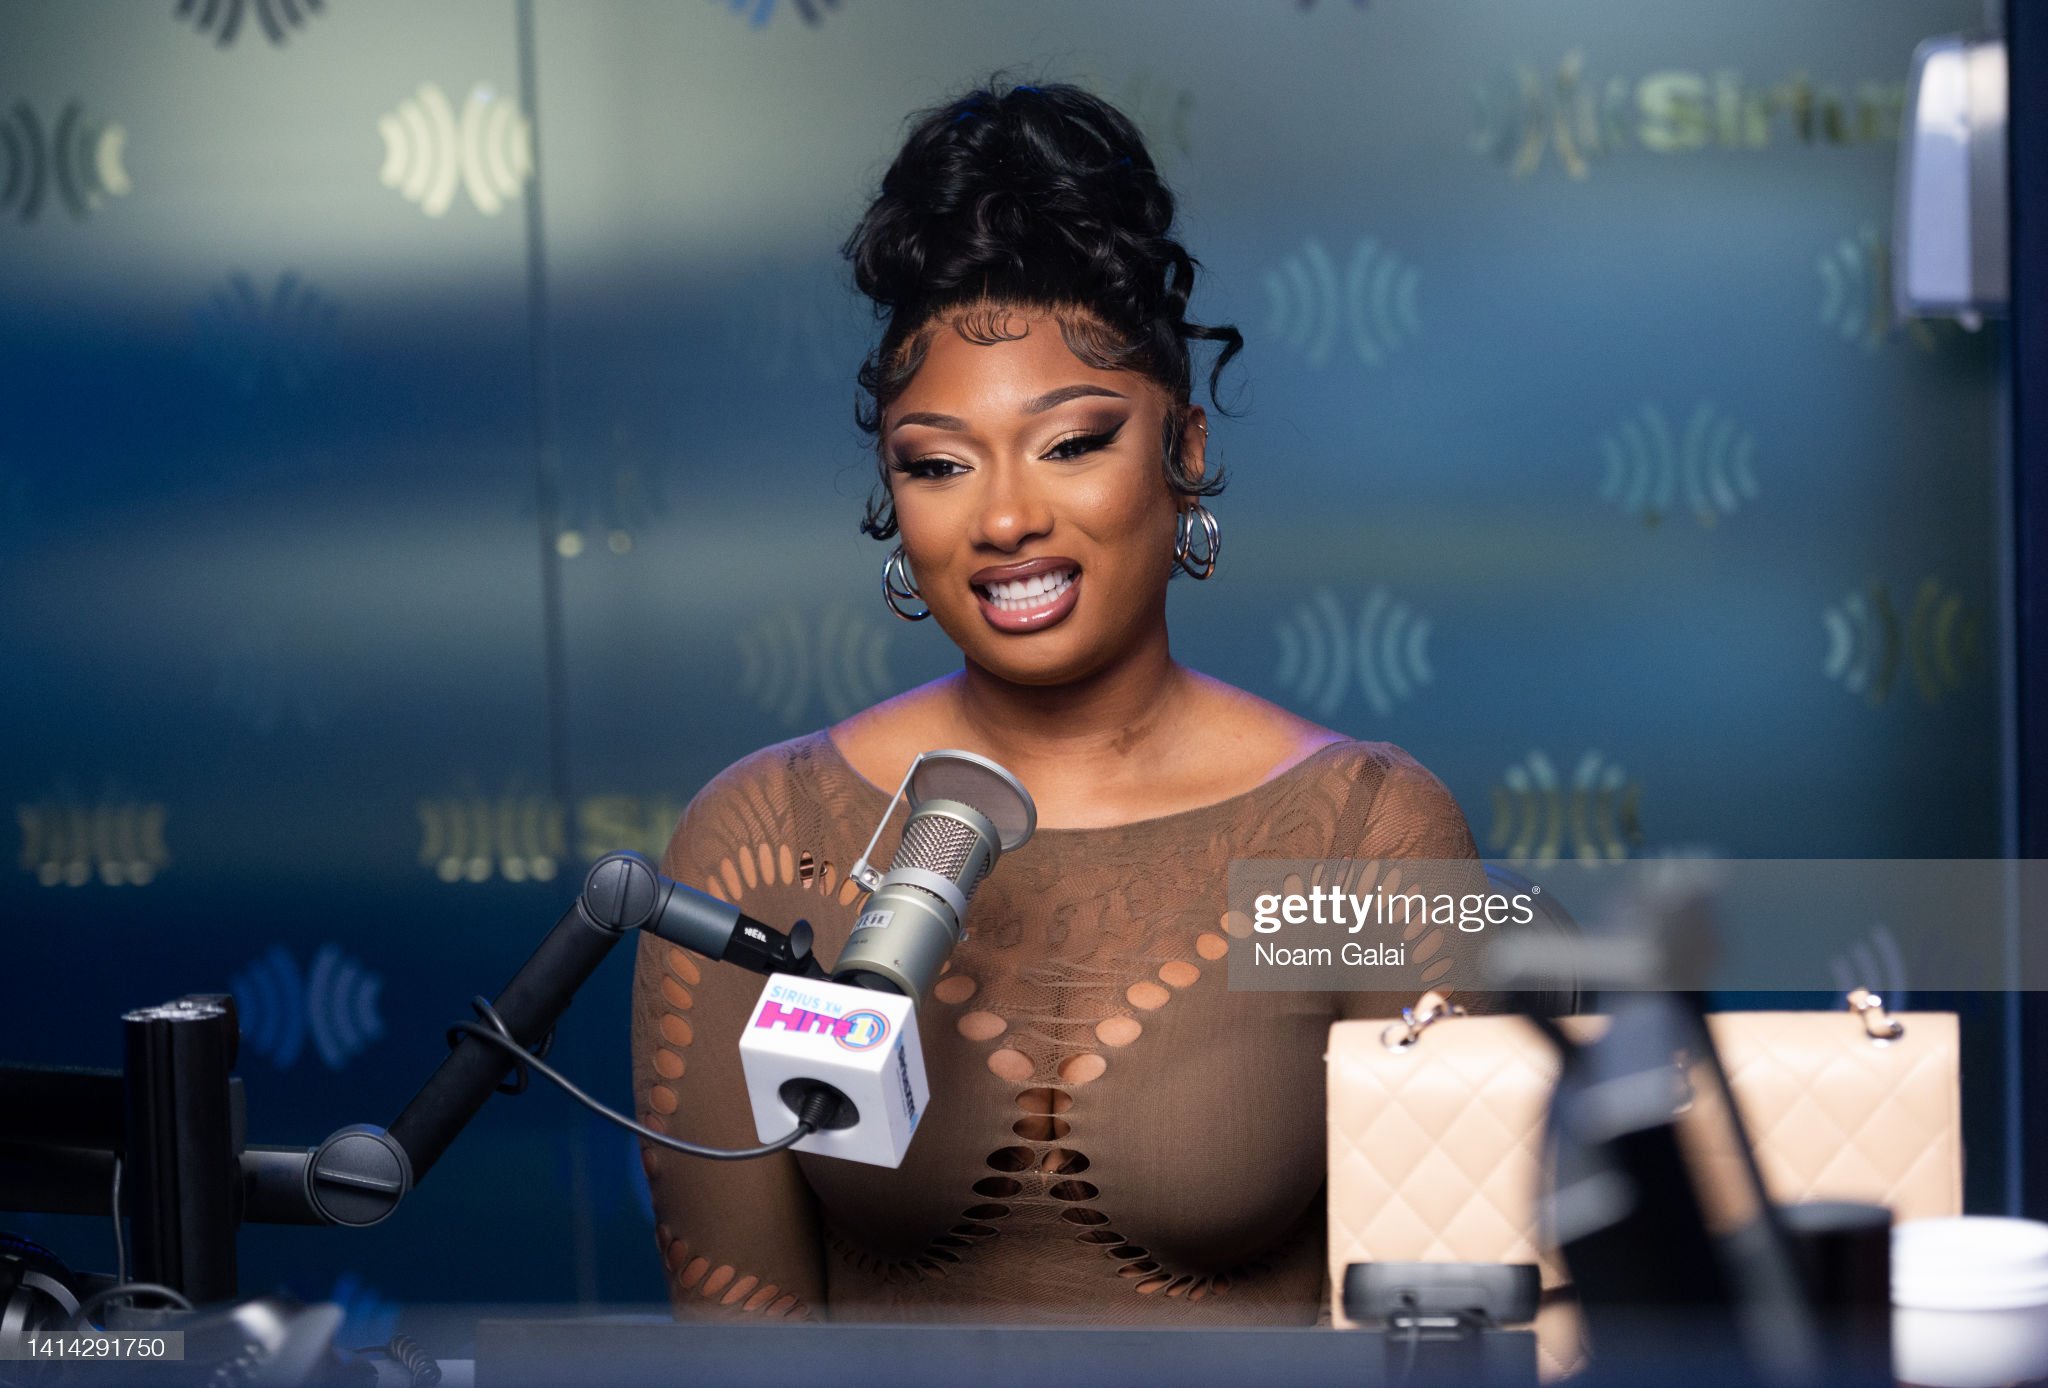 Megan Thee Stallion Reacts To The Rock Wanting To Be Her Pet + More On SiriusXM Hits 1